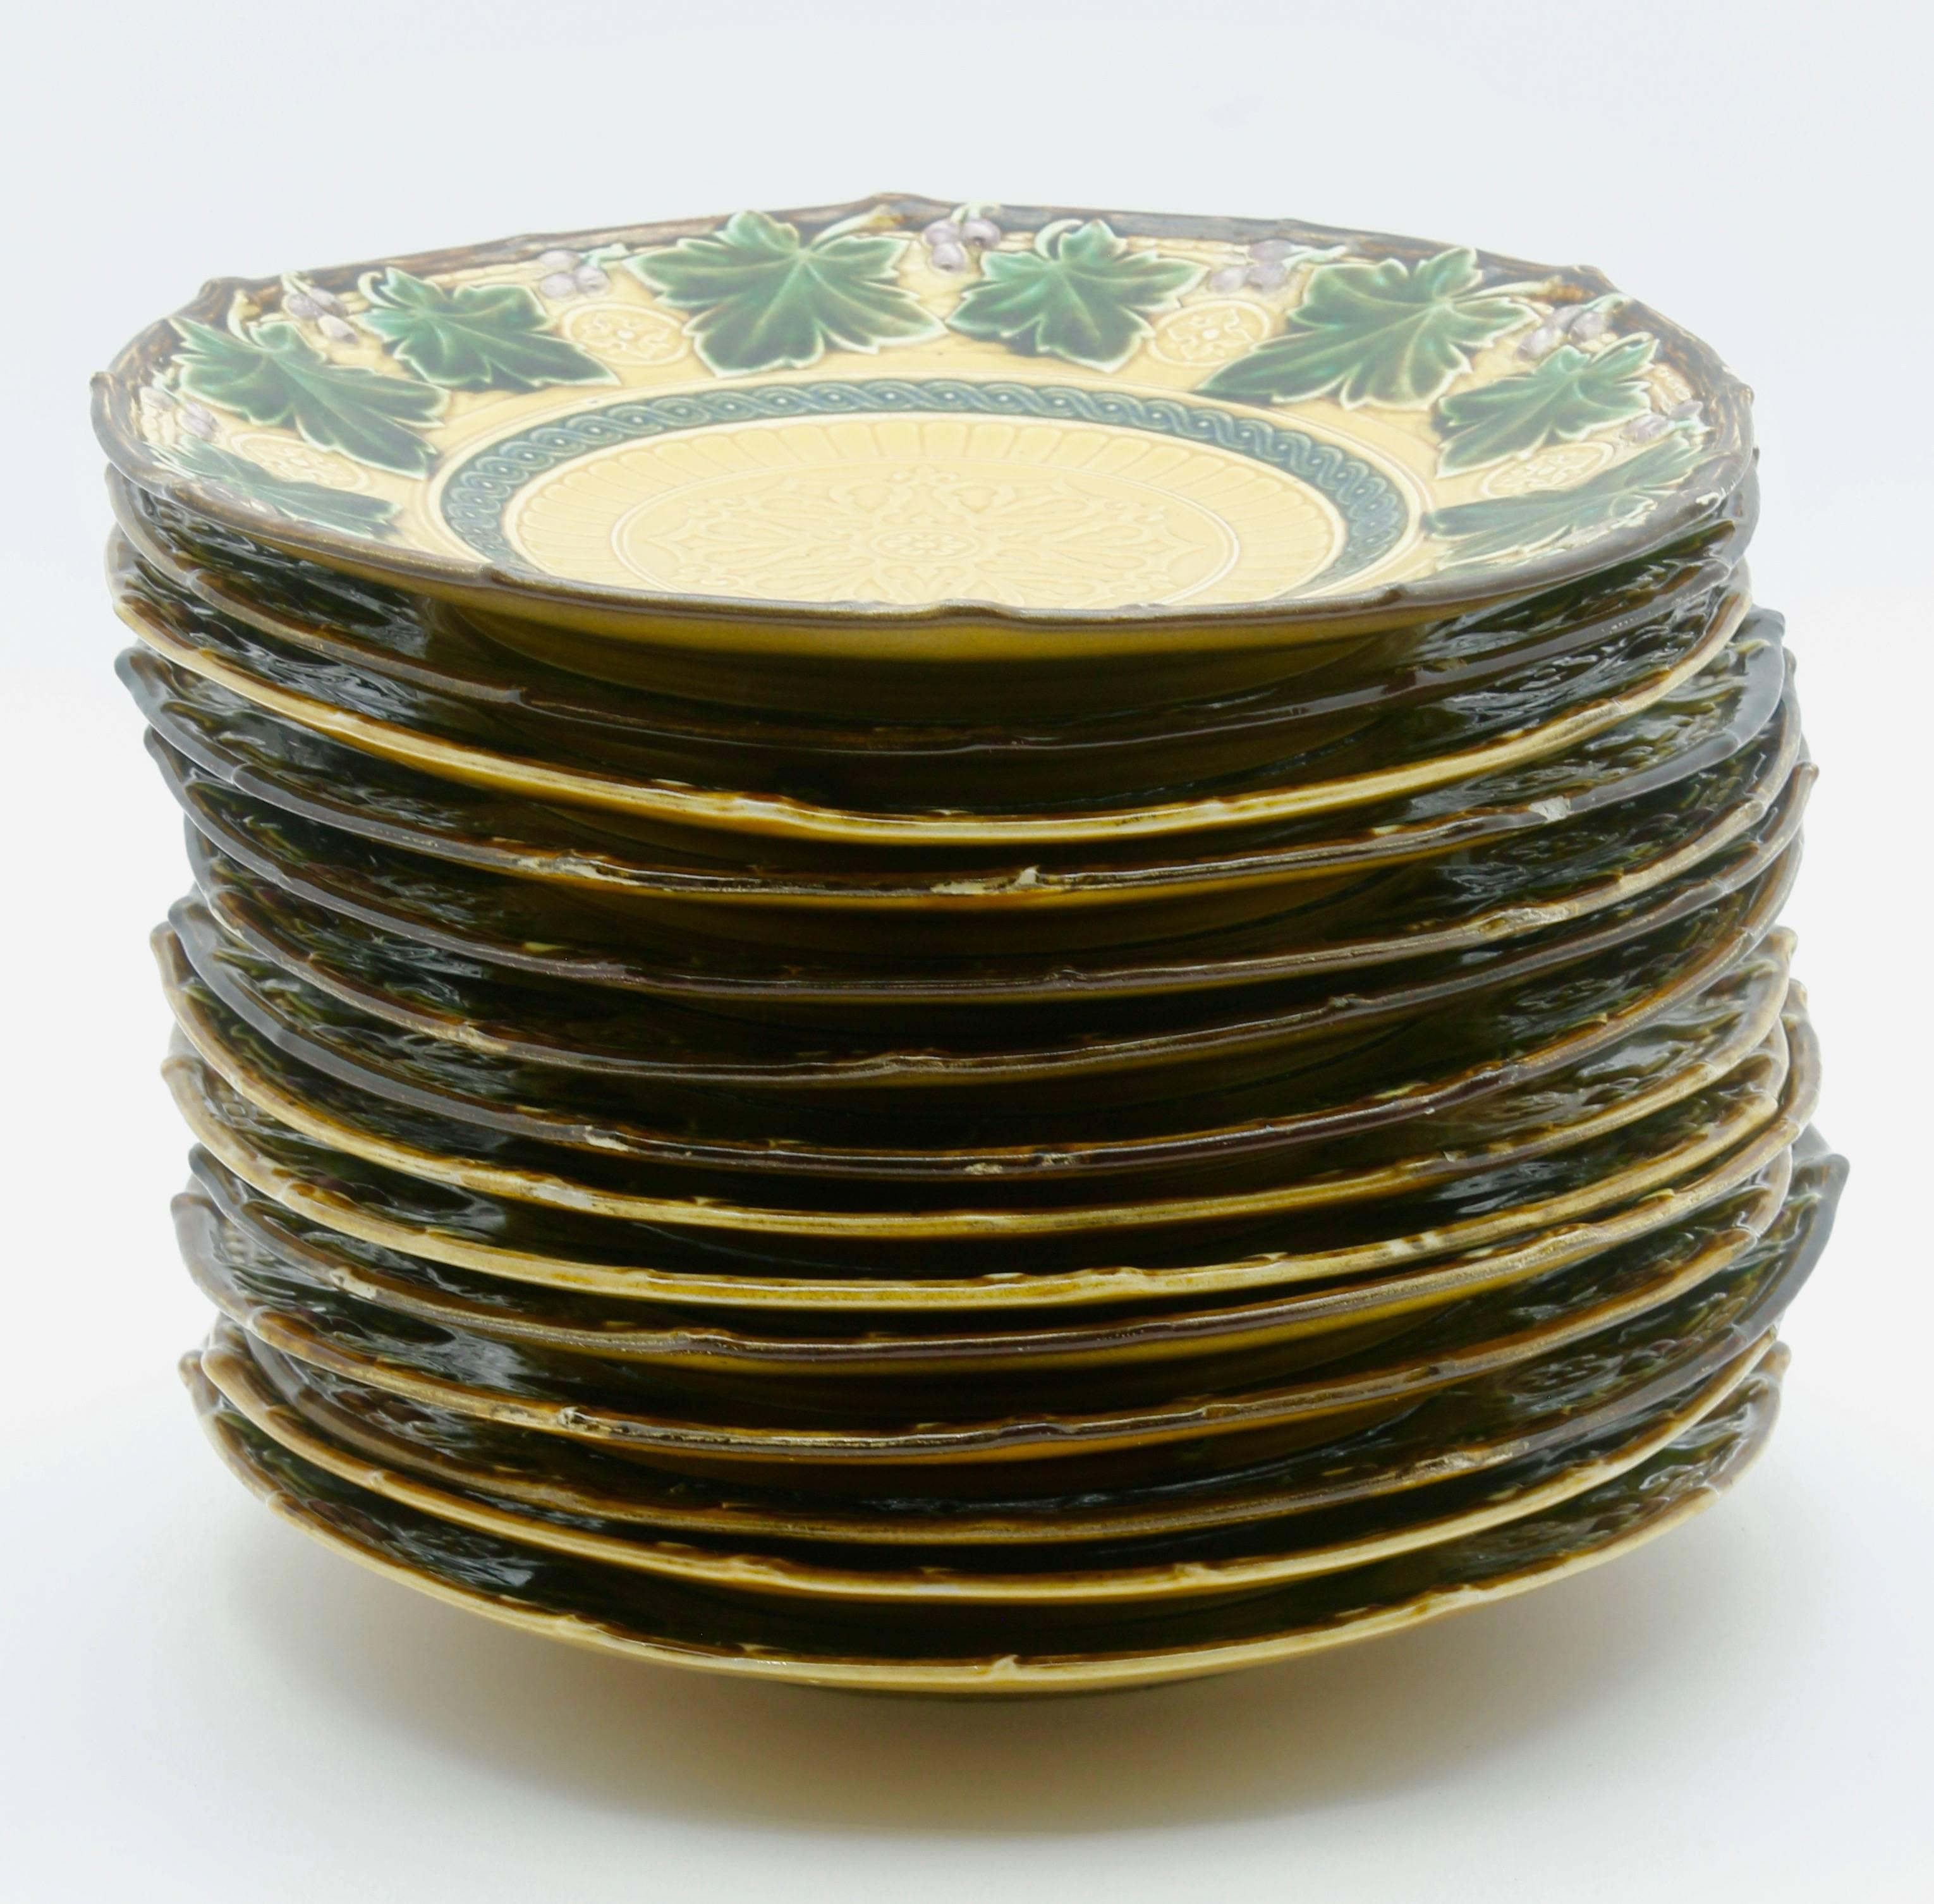 Art Nouveau Majolica glazed tableware set of 16 pieces flower pattern in relief.

Majolica is a type of earthenware, decorated with colored lead glazes. 
Victorian Majolica was made between 1849 and 1900.

Measure: 15 plates diameter 8.85